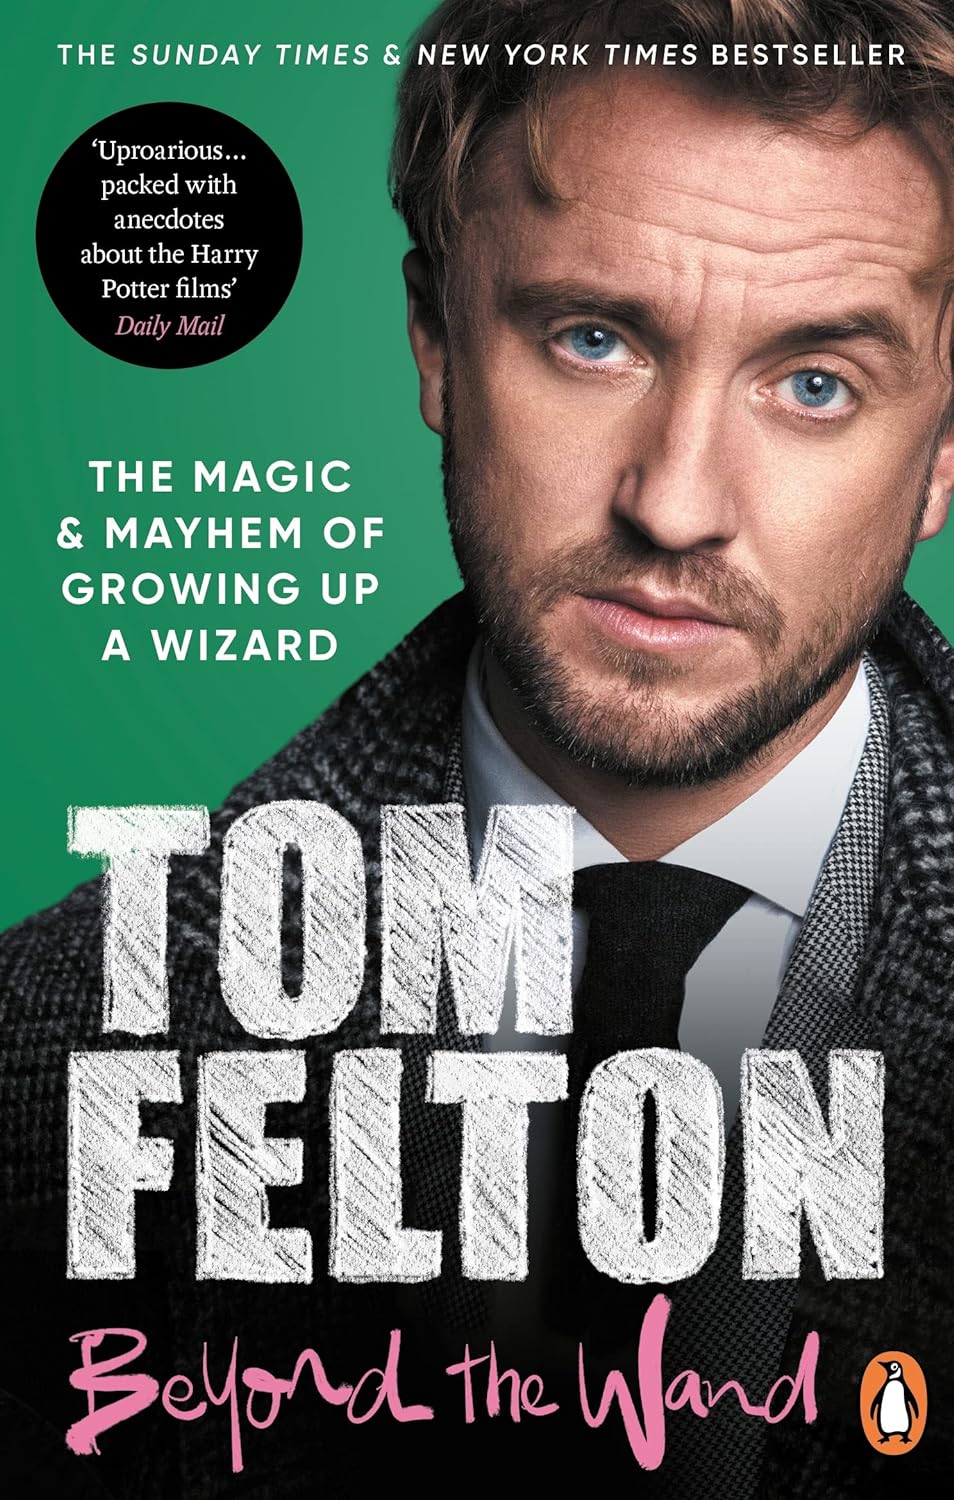 Beyond the Wand: Exploring Magic and Mystery with Tom Felton